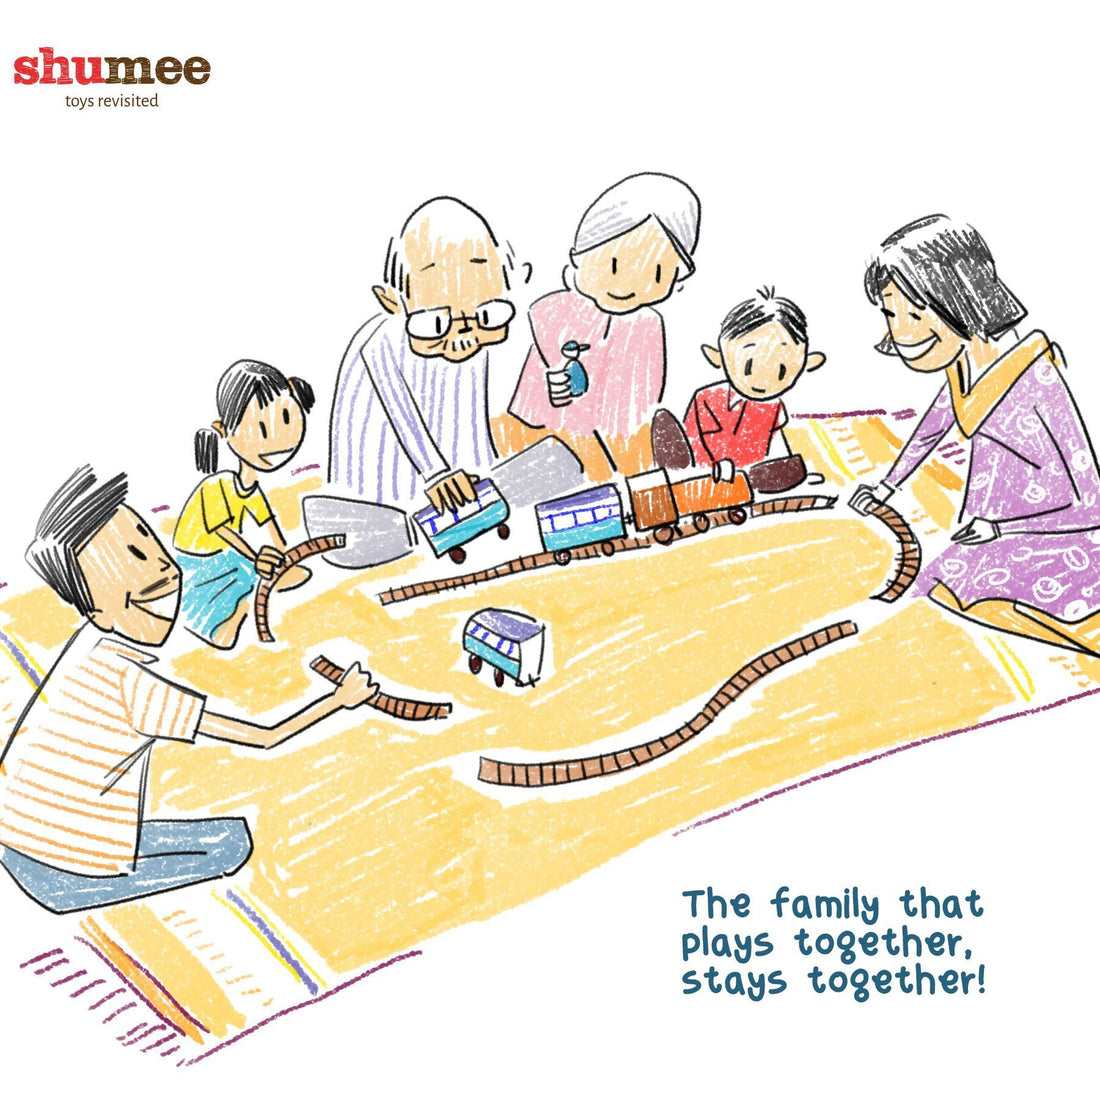 Playing toys with the family together - Shumee Educational Toys for Kids